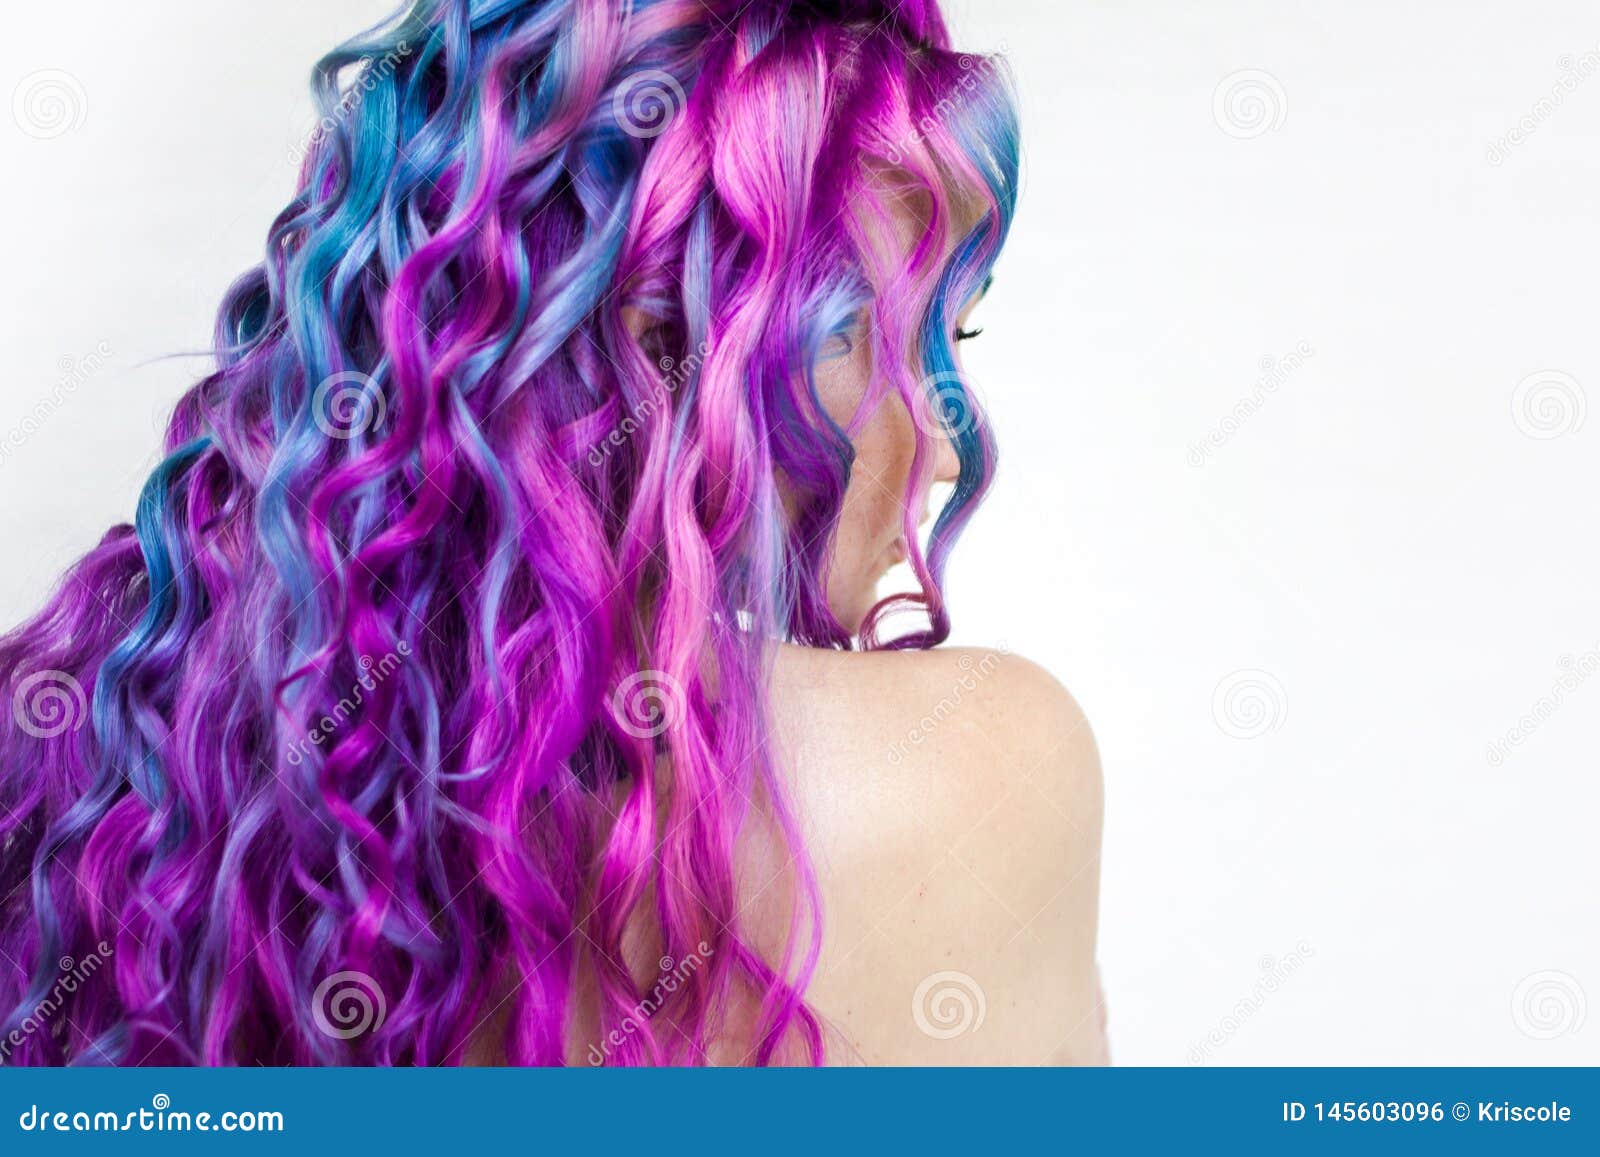 Udstyr Bagvaskelse i aften Bright Multi-colored Hair Coloring, Gradient Blue Purple and Pink Shades.  Beautiful Hair Stock Photo - Image of elegance, back: 145603096